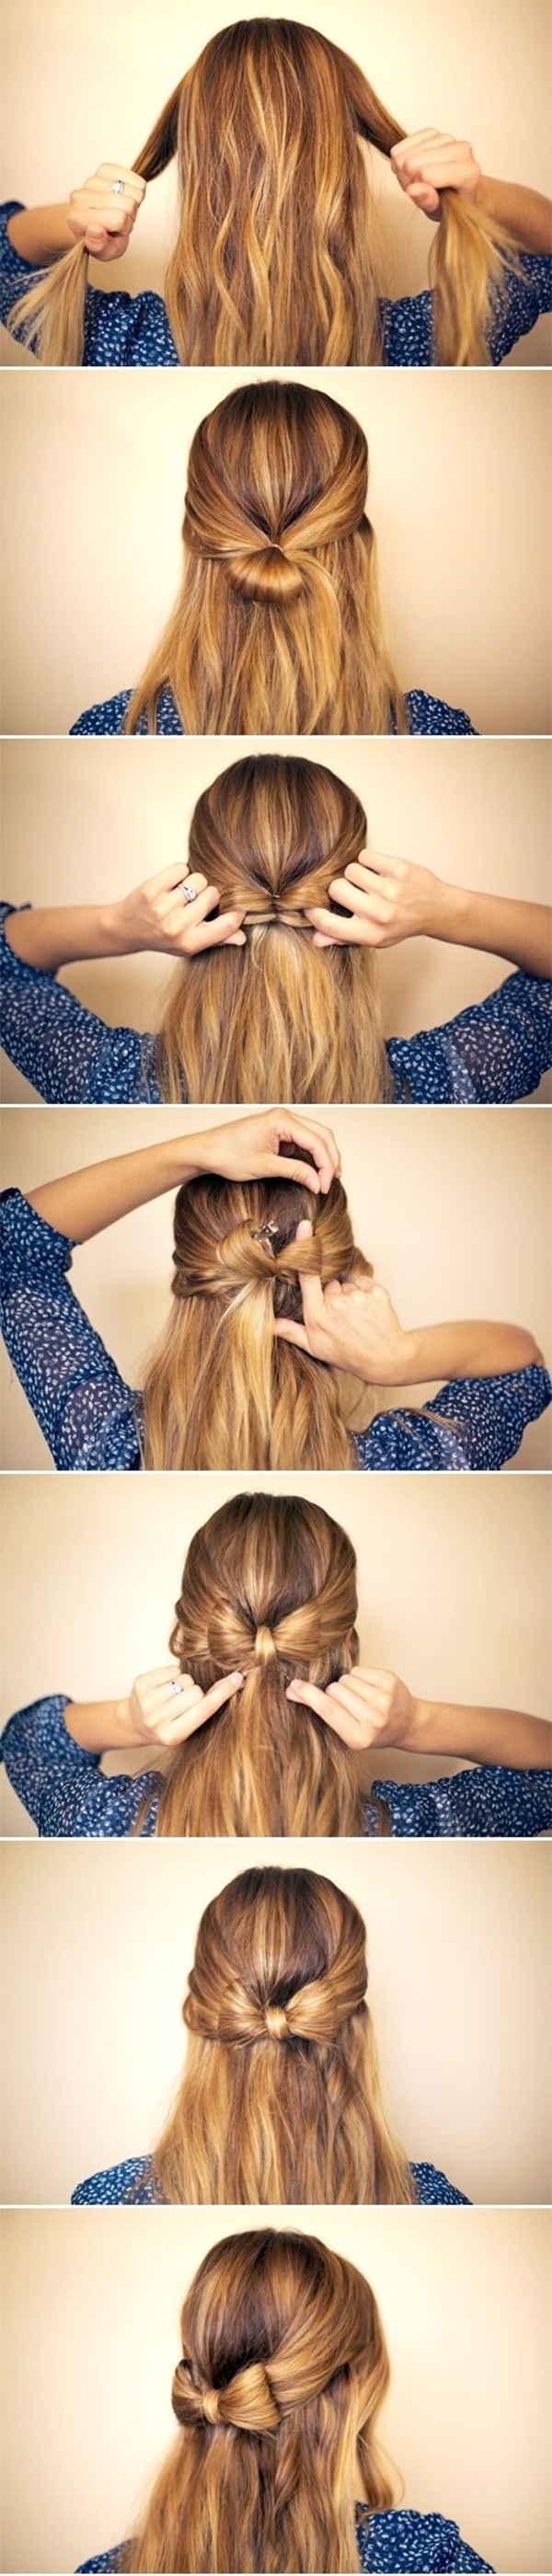 Simple Five Minute Hairstyles (26)